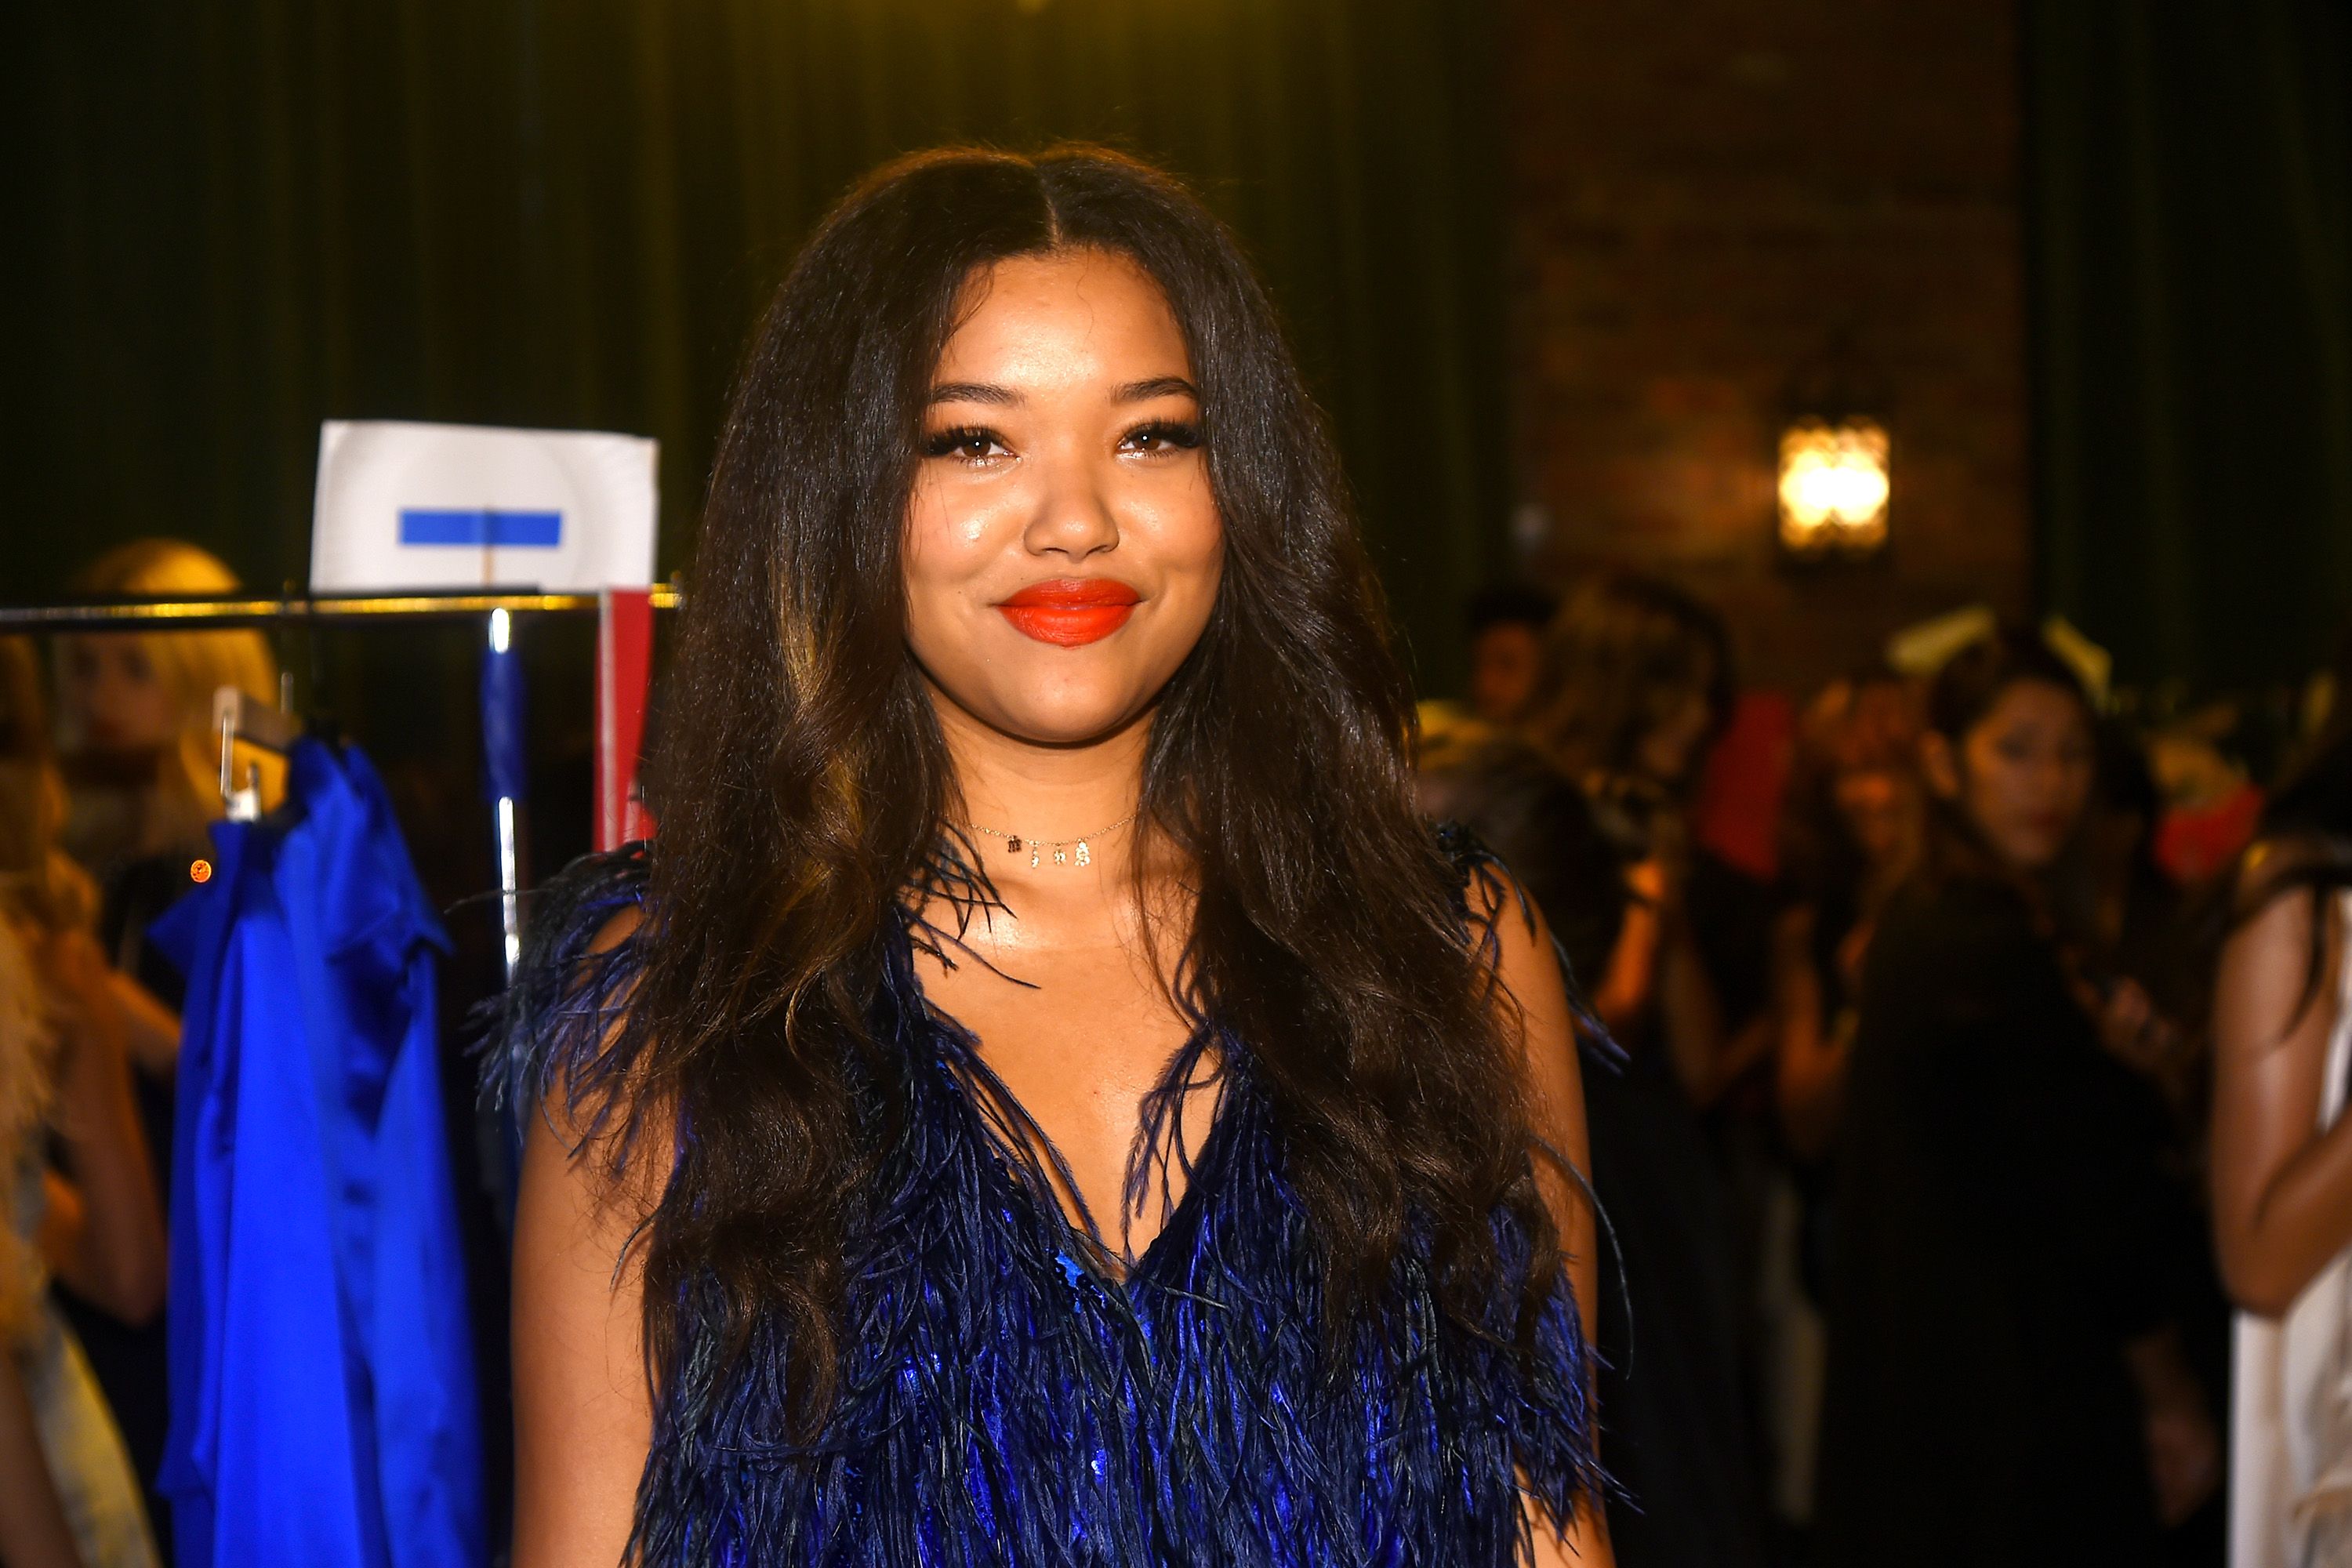 The Bowery Hotel on 13th September 2017: Ming Lee Simmons appearing at her mother’s presentation during NY Fashion Week. | Photo: Getty Images